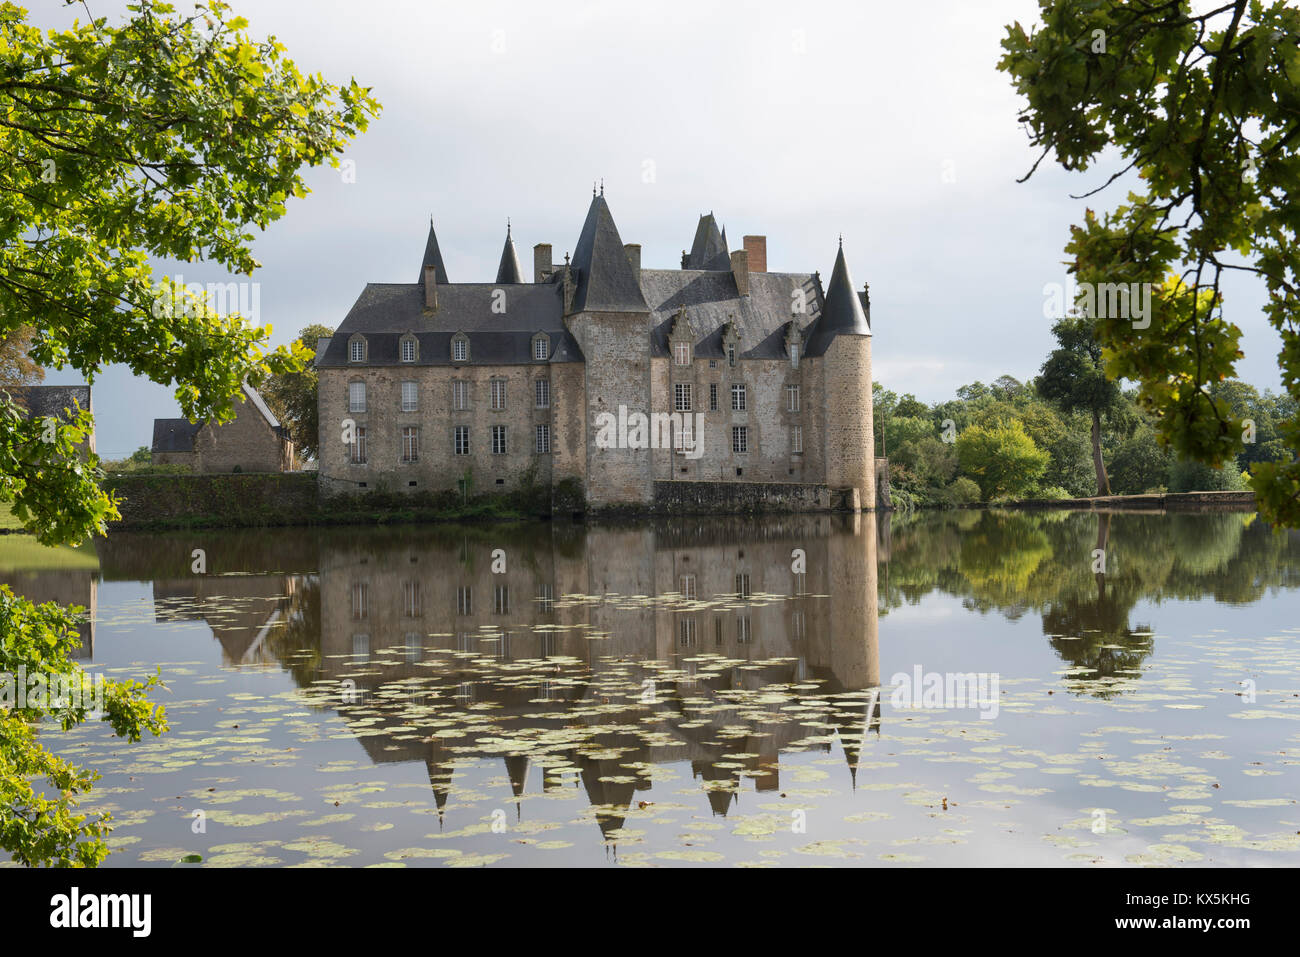 The Chateau du Rocher in the town of  Mezangers in the Mayenne region of France. Stock Photo